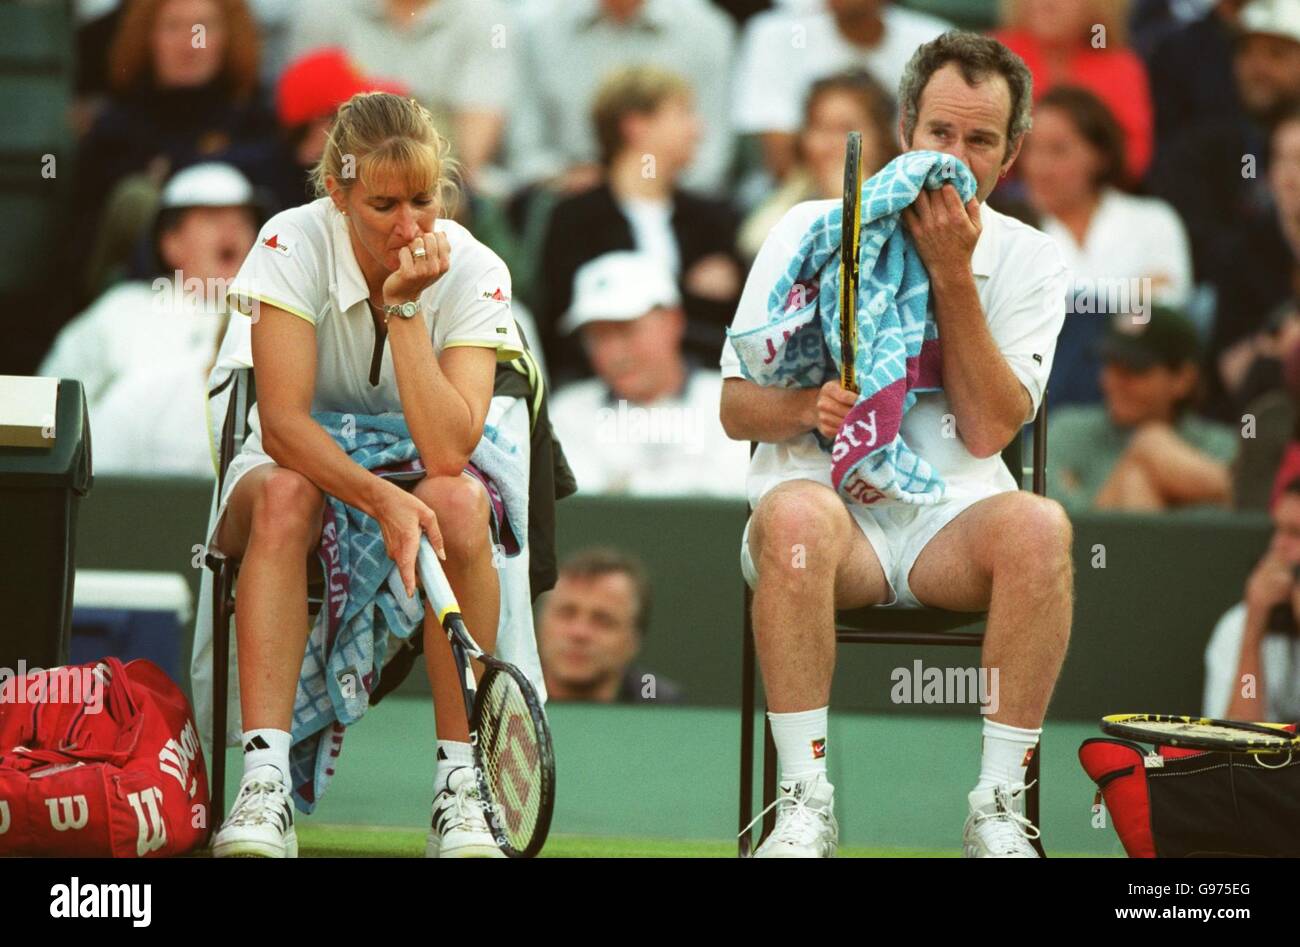 Tennis - Wimbledon Championships - Mixed Doubles - First Round - John  McEnroe and Steffi Graf v Jeff Coetzee and